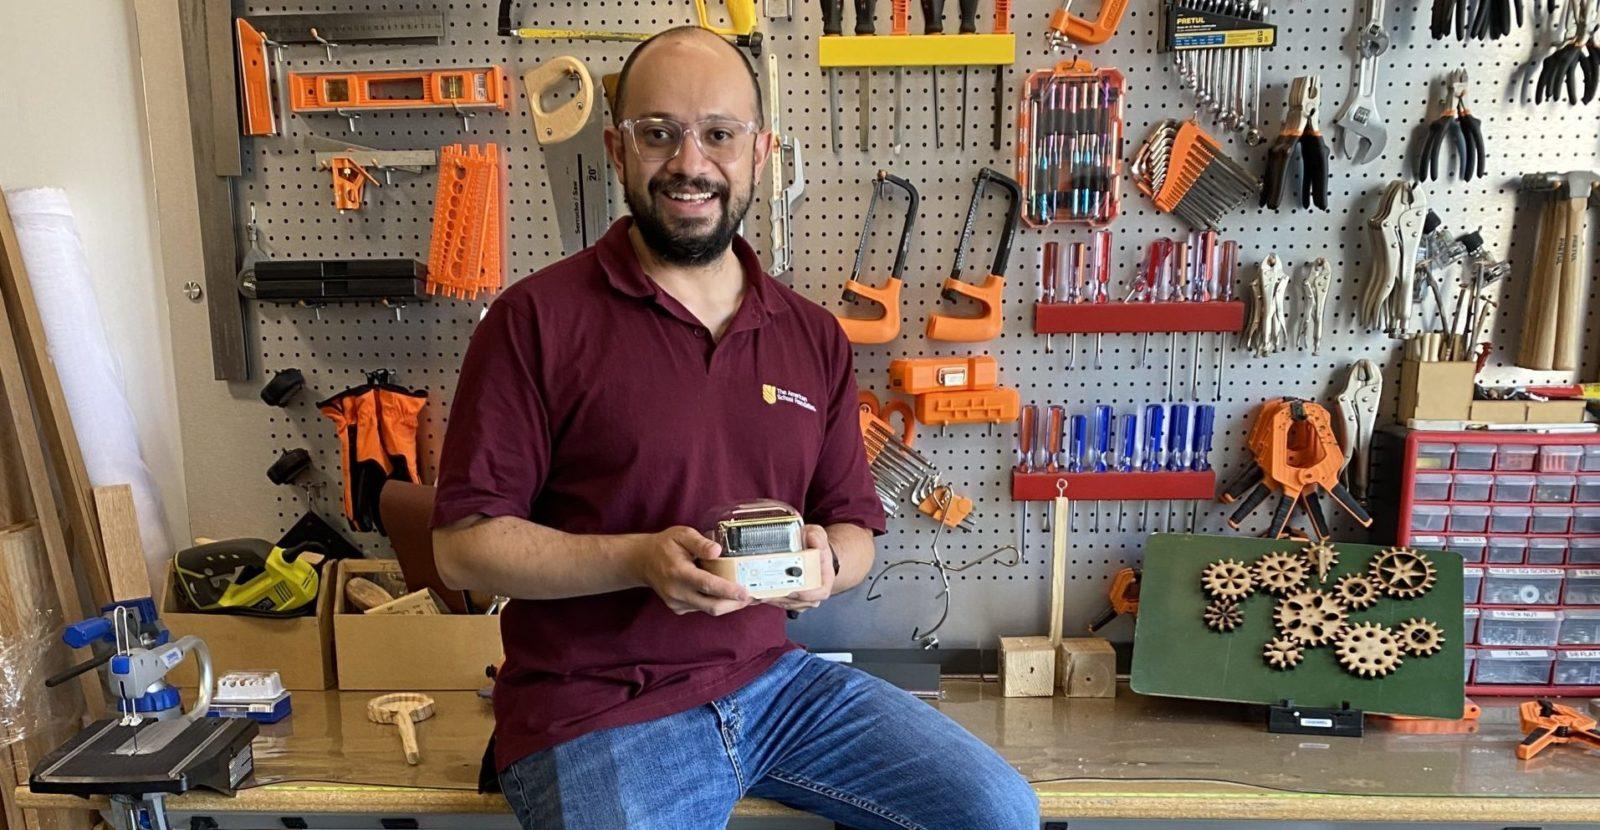 Mexico educational user of Muro Box, holding a Muro Box in his maker space